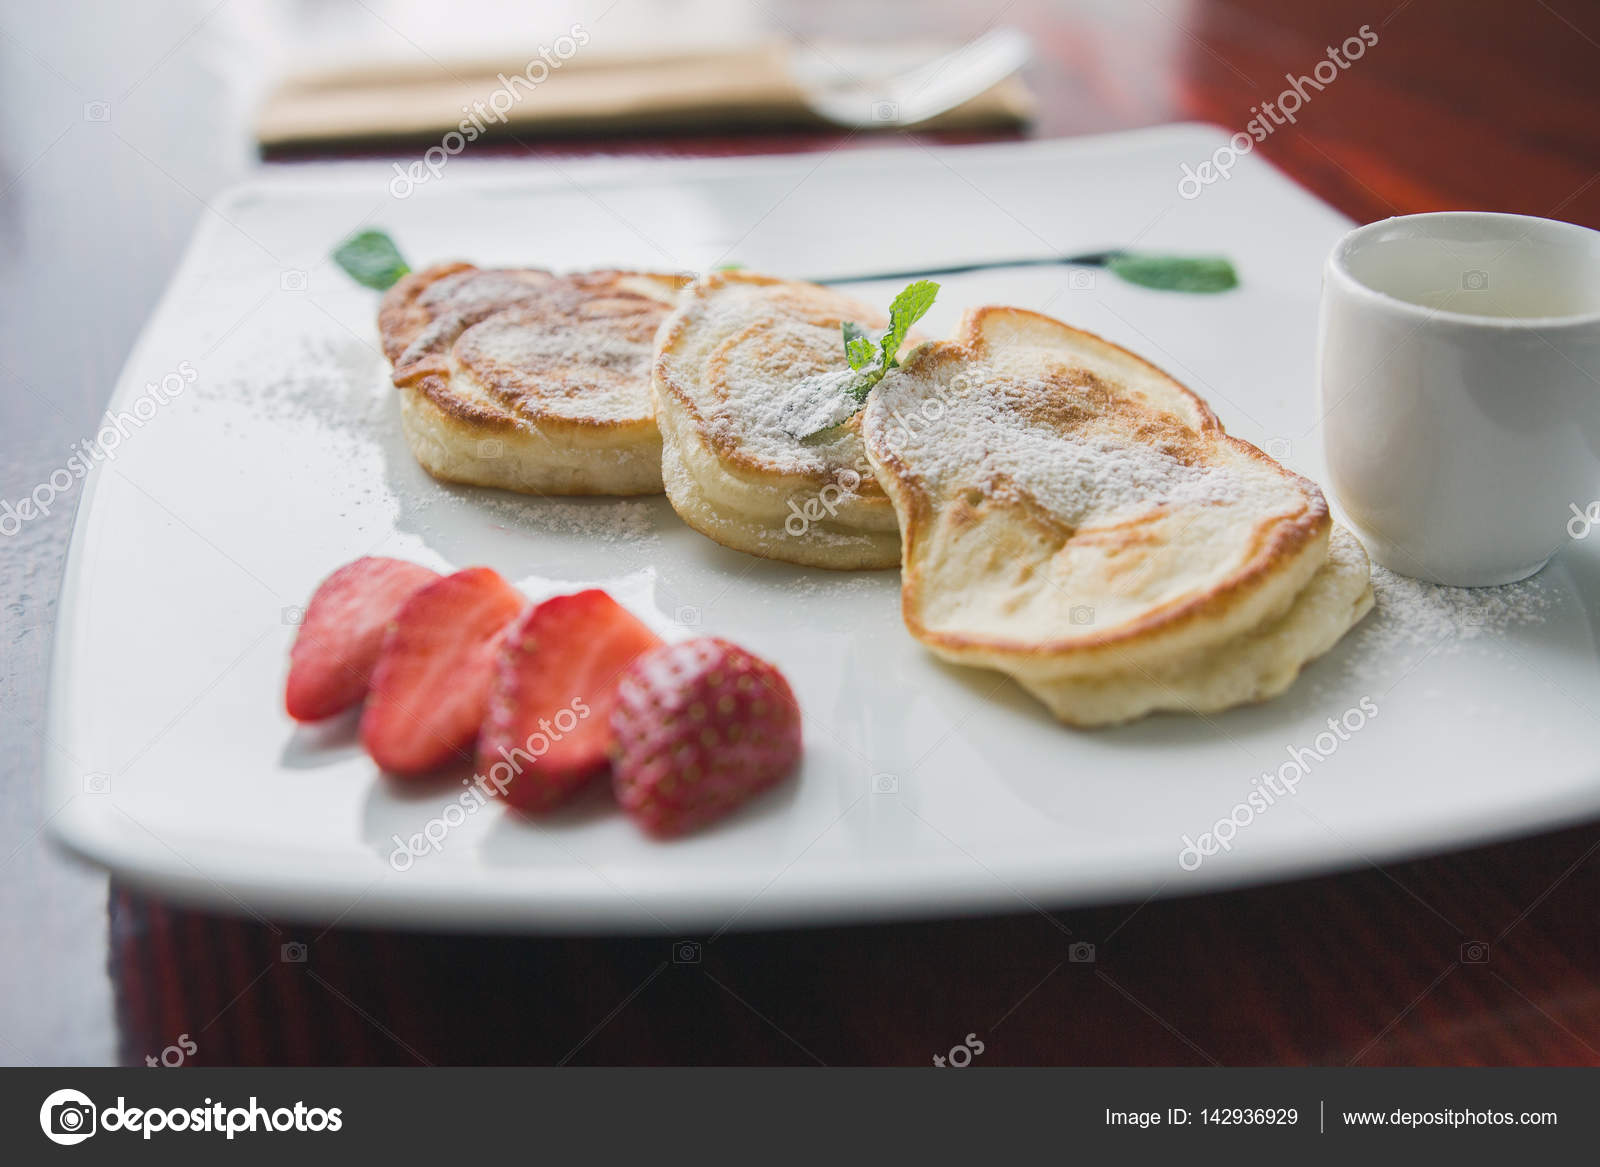 Hot Pancake With Strawberry And Sauce Fritters Of Cottage Cheese